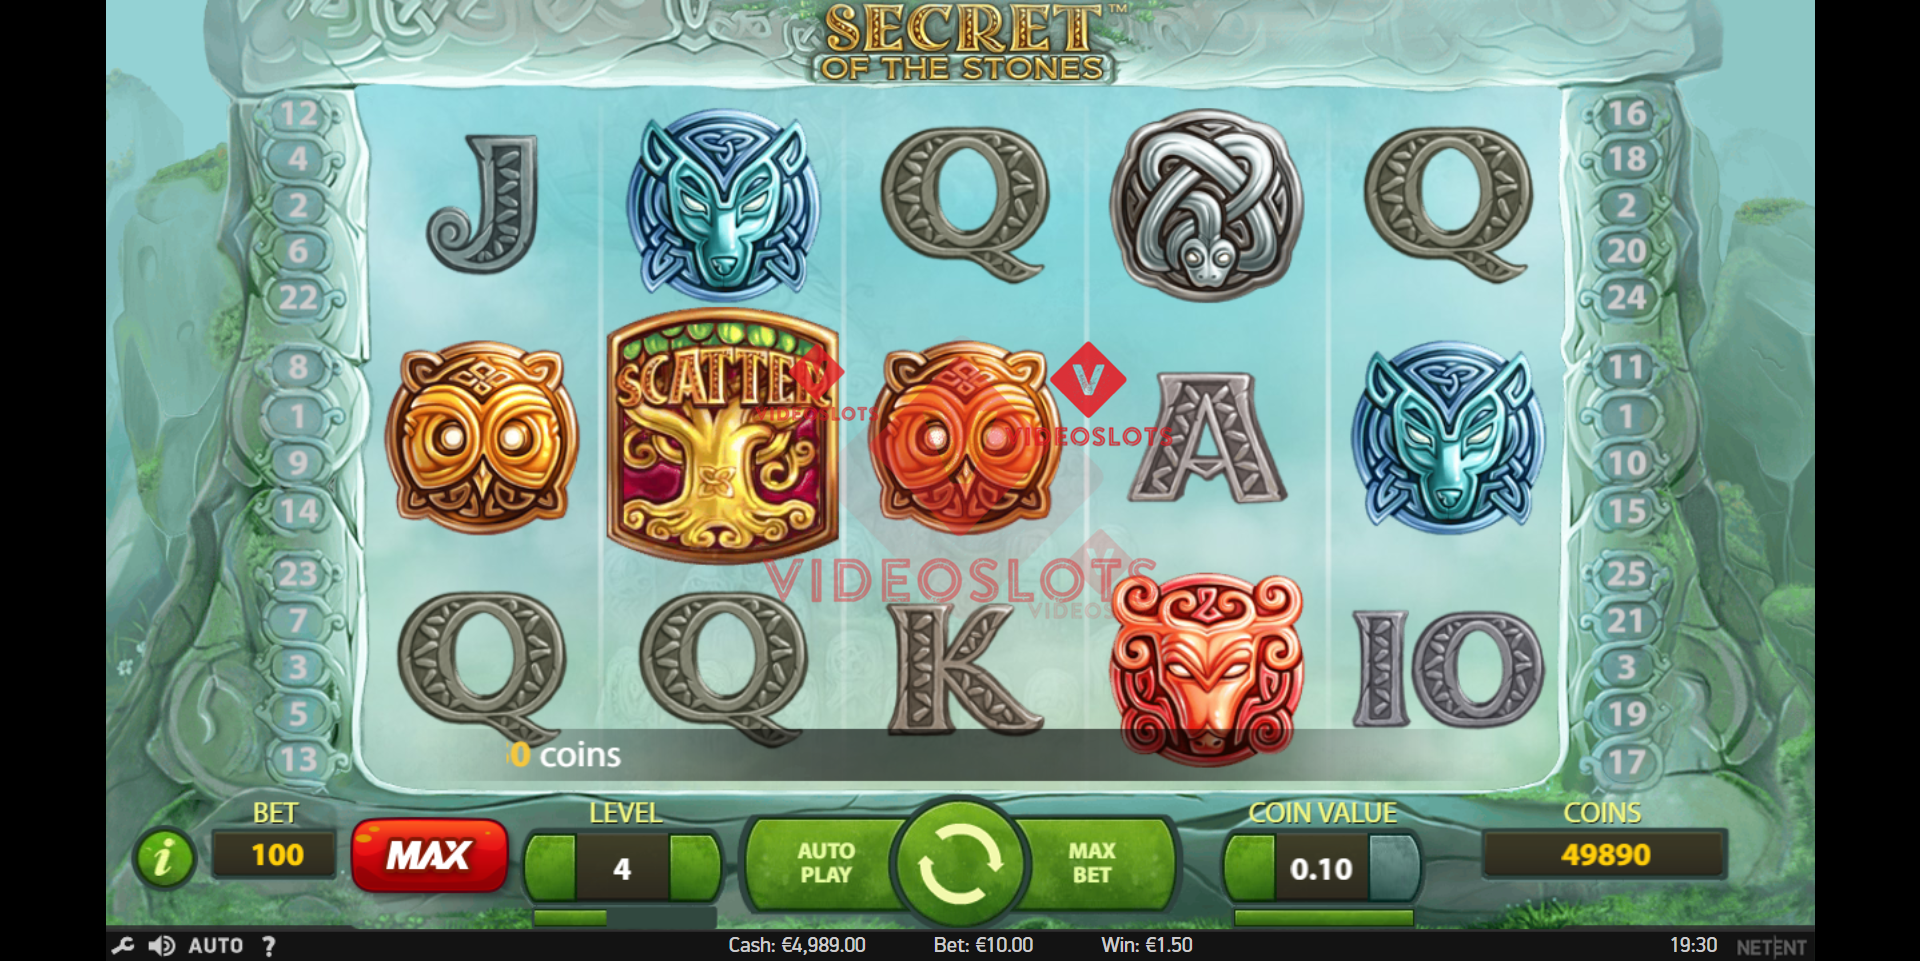 Base Game for Secret of the Stones slot from NetEnt